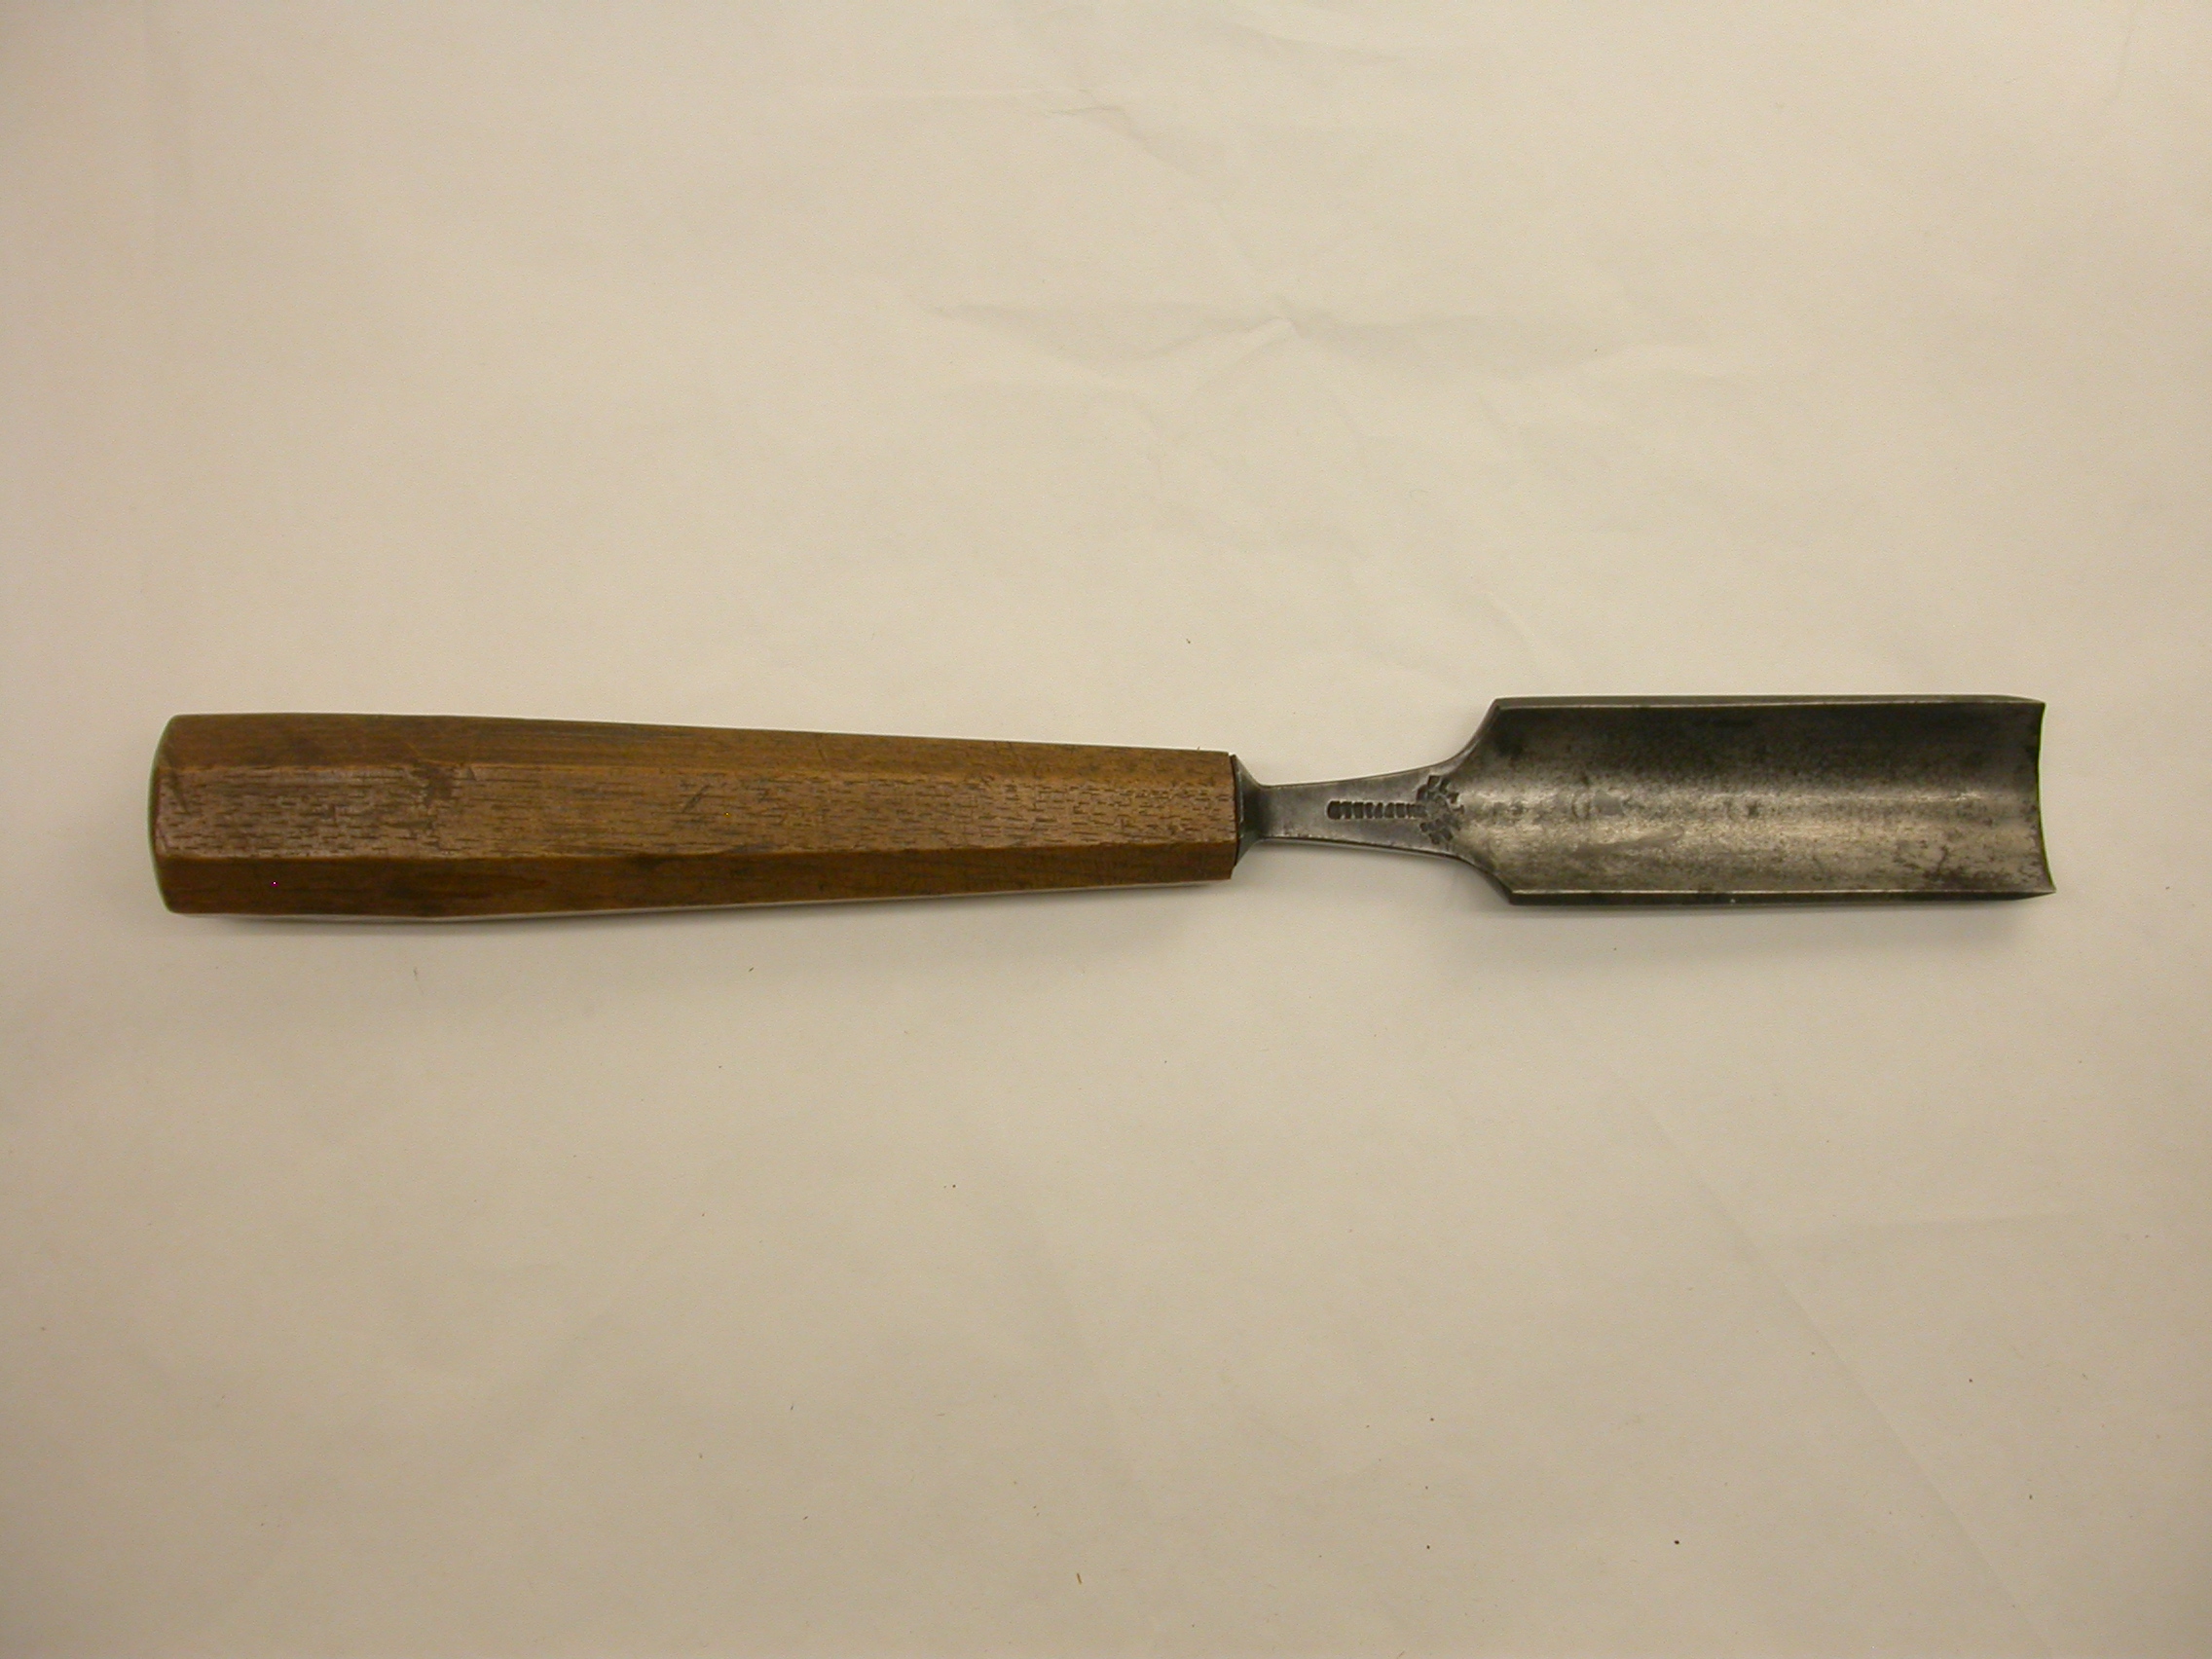 cast%20steel%20gouge%20with%20wooden%20handle